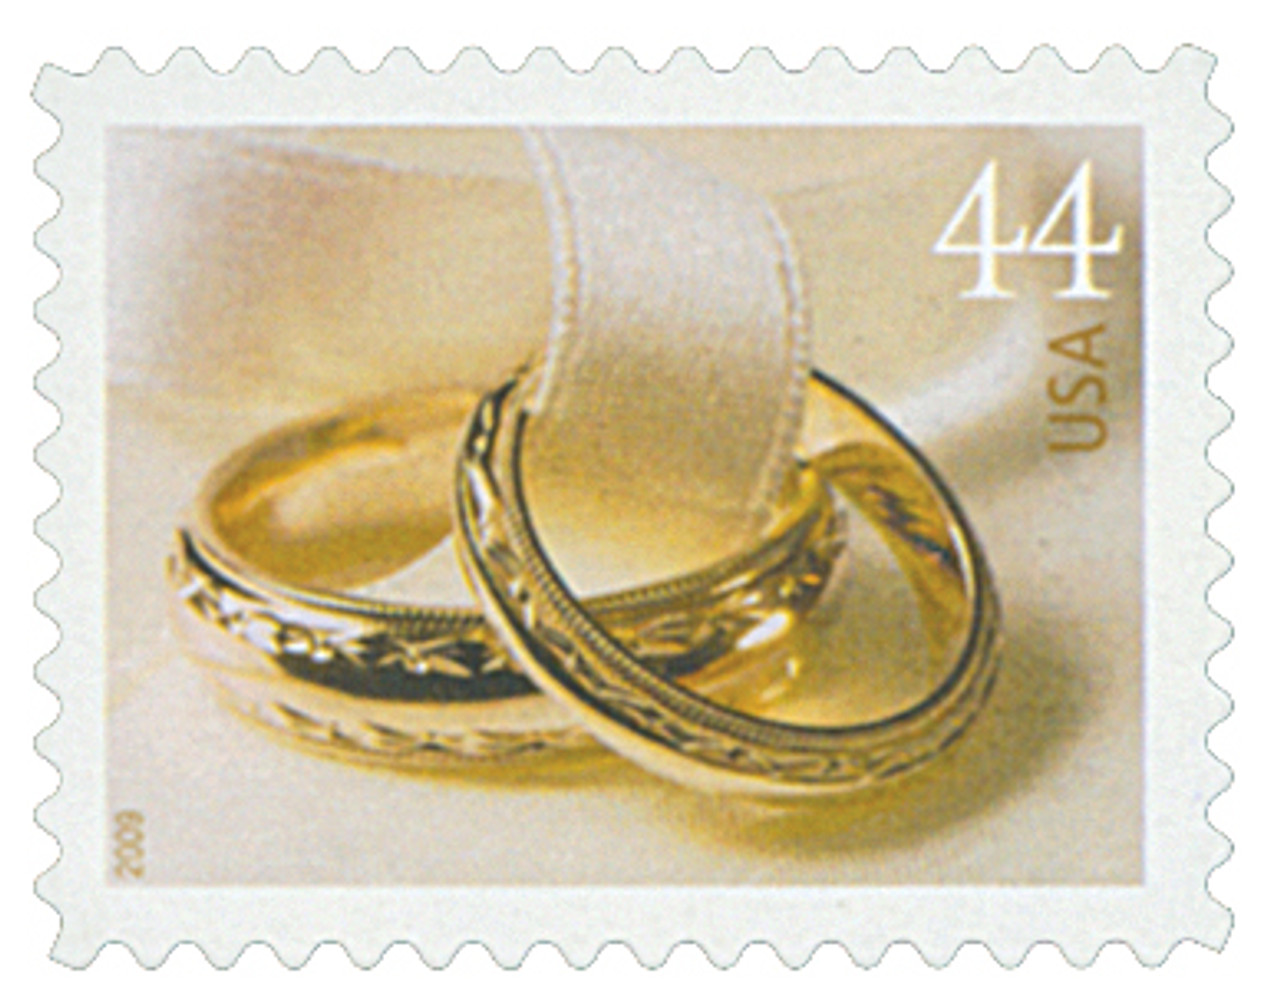 3836/5458 - 2004-20 Wedding Series, set of 26 stamps - Mystic Stamp Company